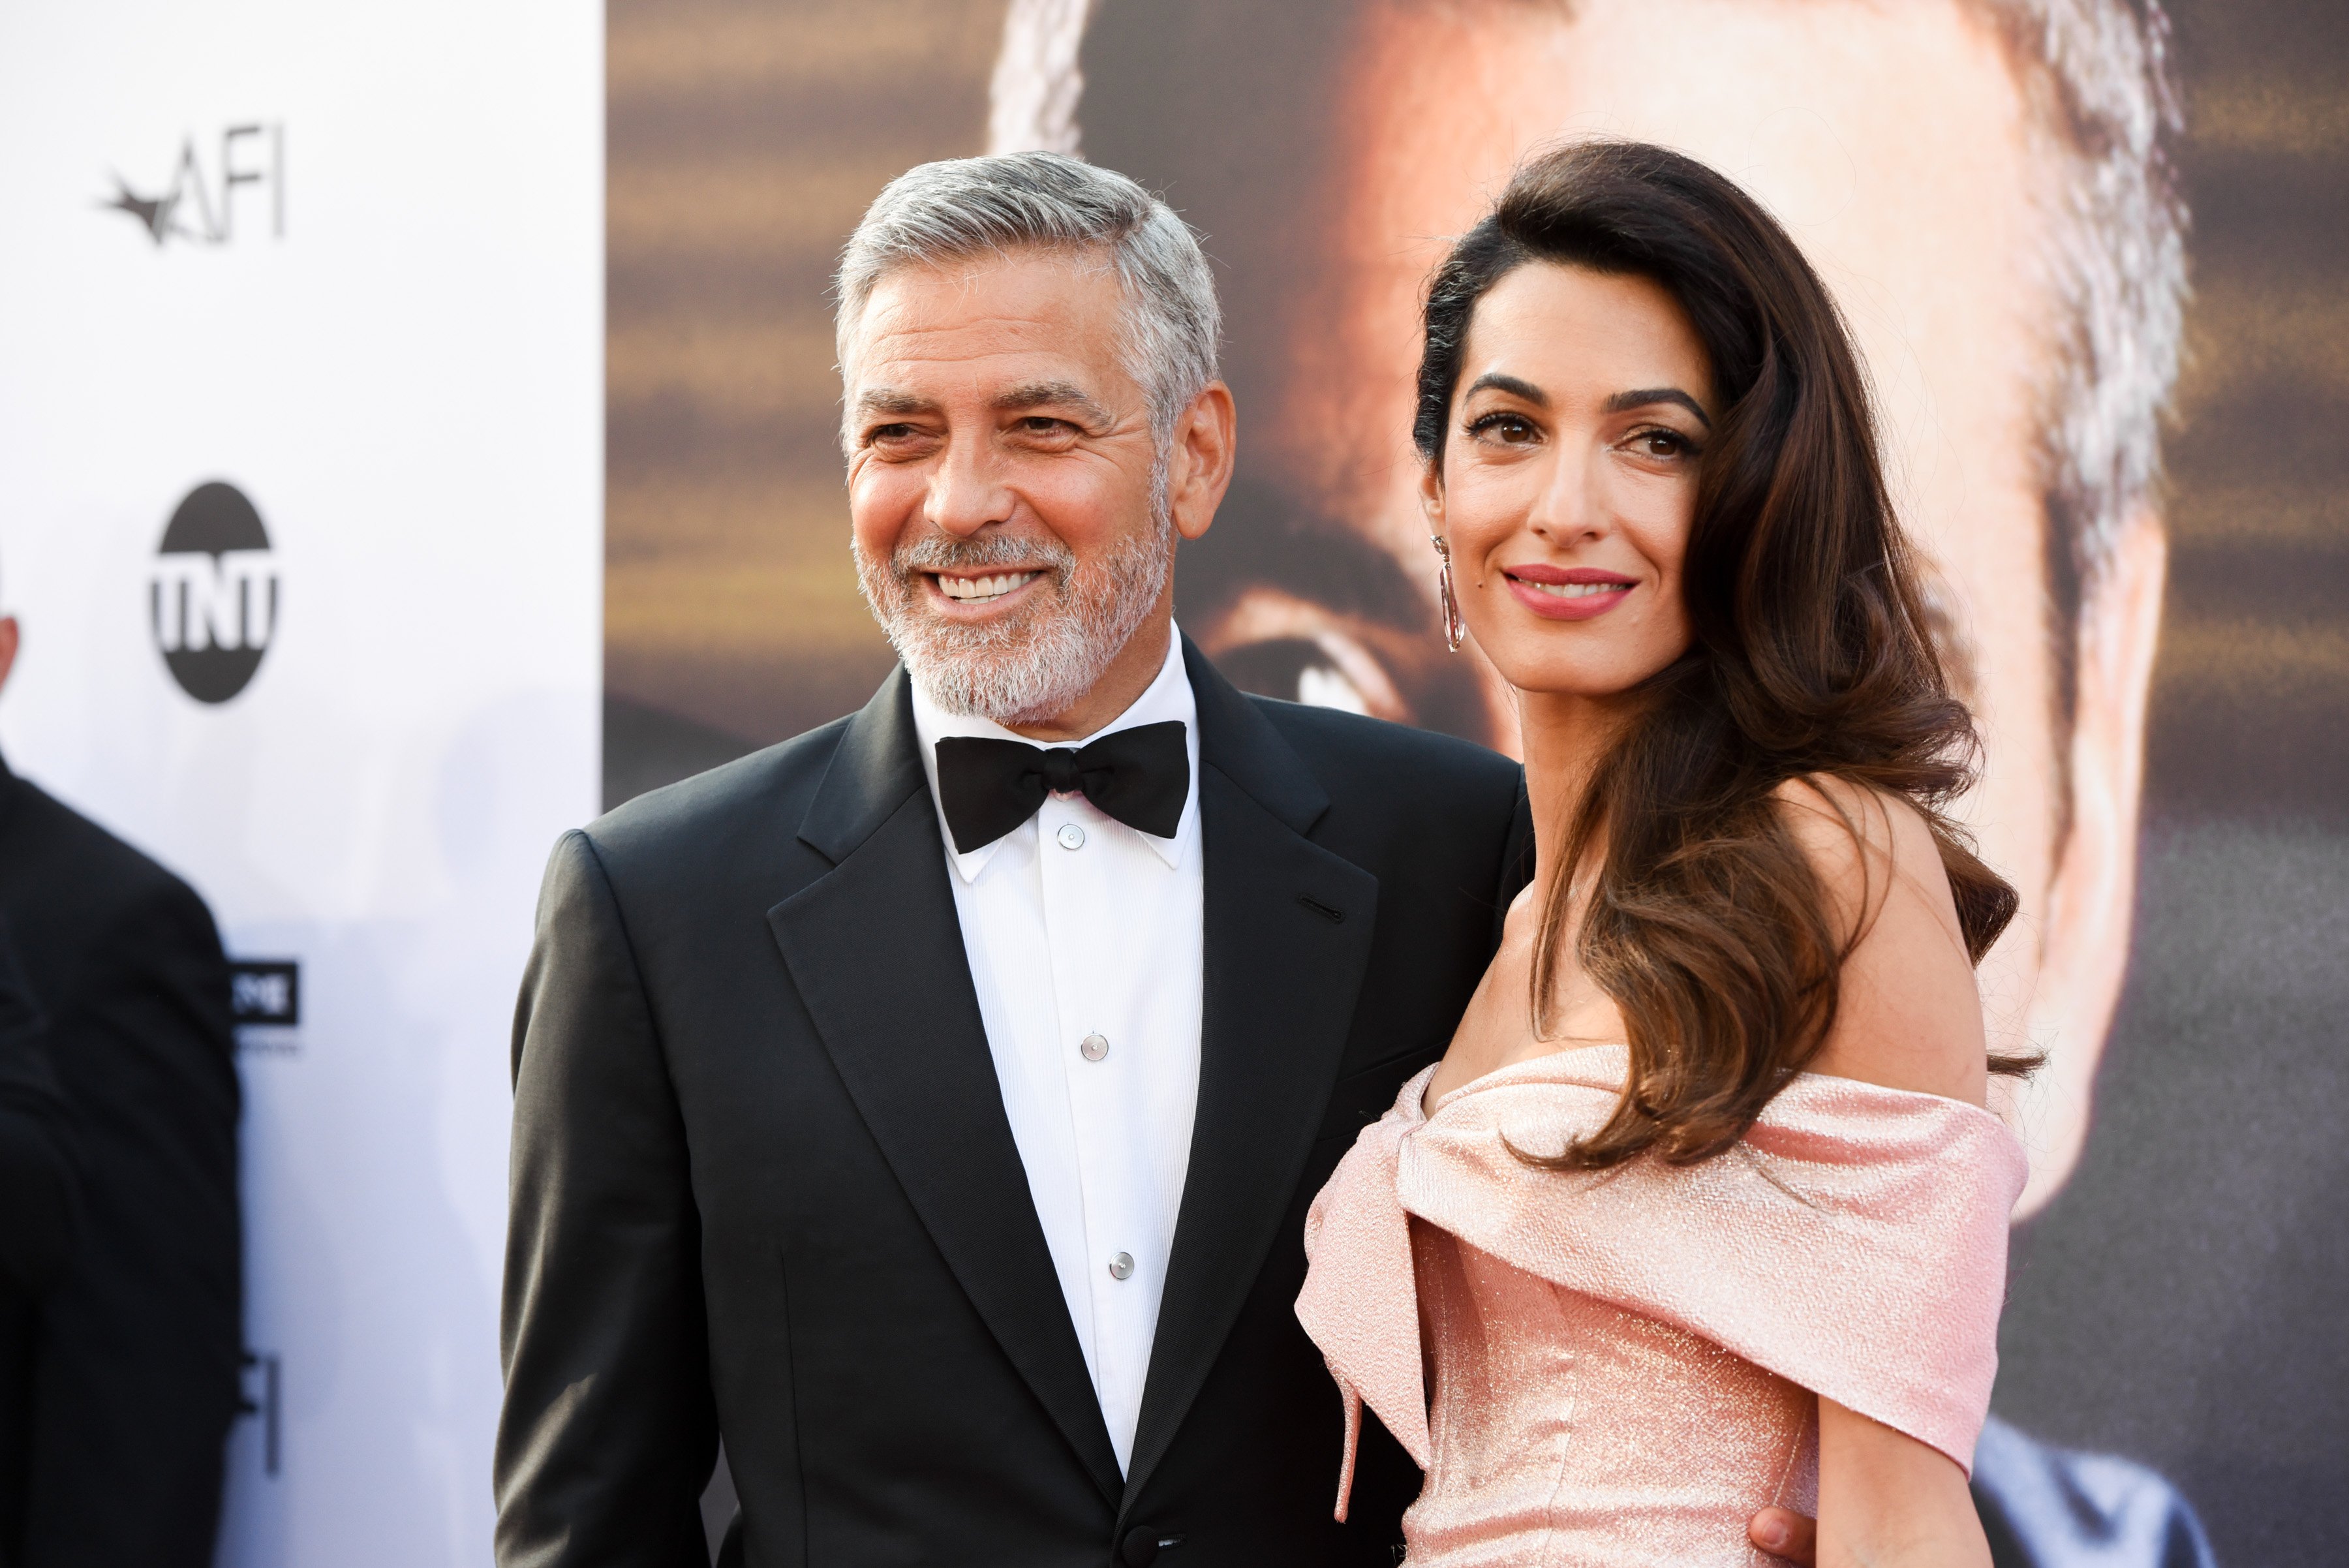 George Clooney and Amal Clooney attend 46th AFI Life Achievement Award Gala Tribute on June 7, 2018 in Hollywood, California | Source: Getty Images